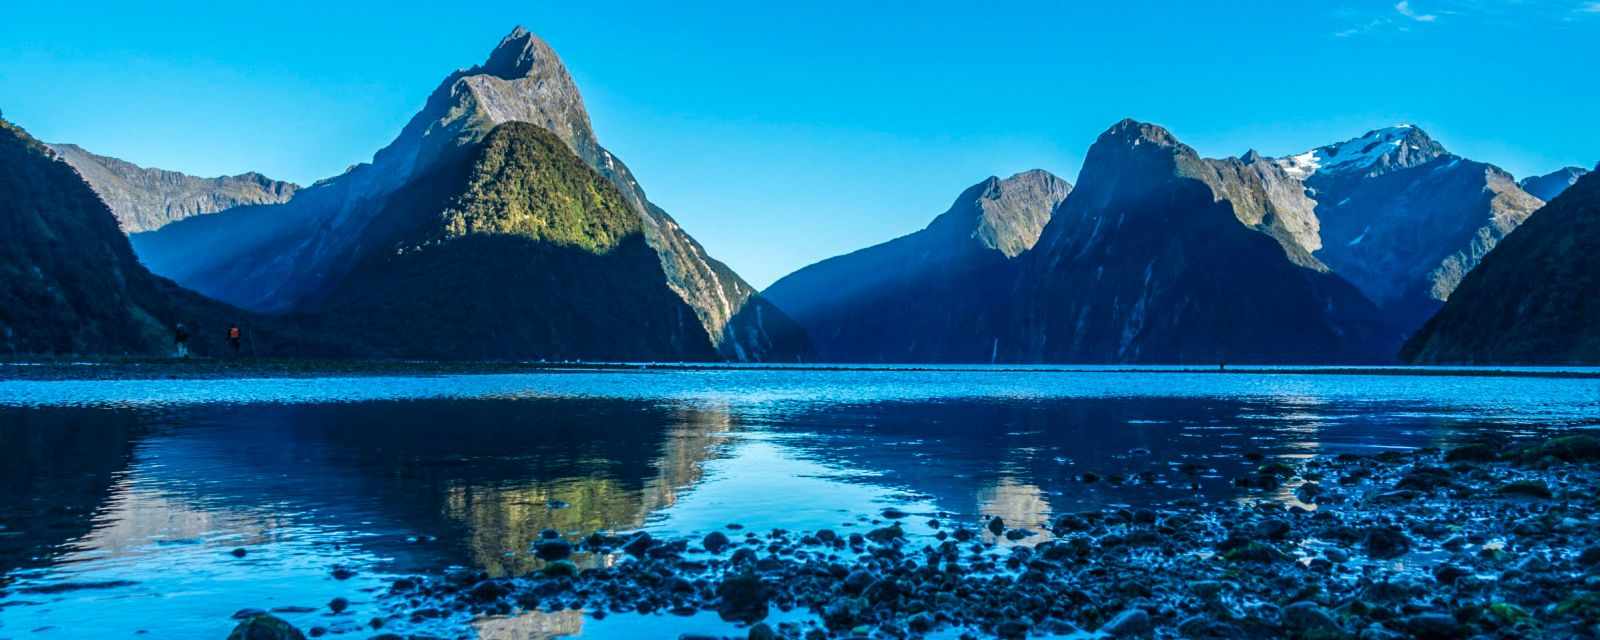 Milford Sound on a Sunny Day - 7 Hikes - 9 Tips